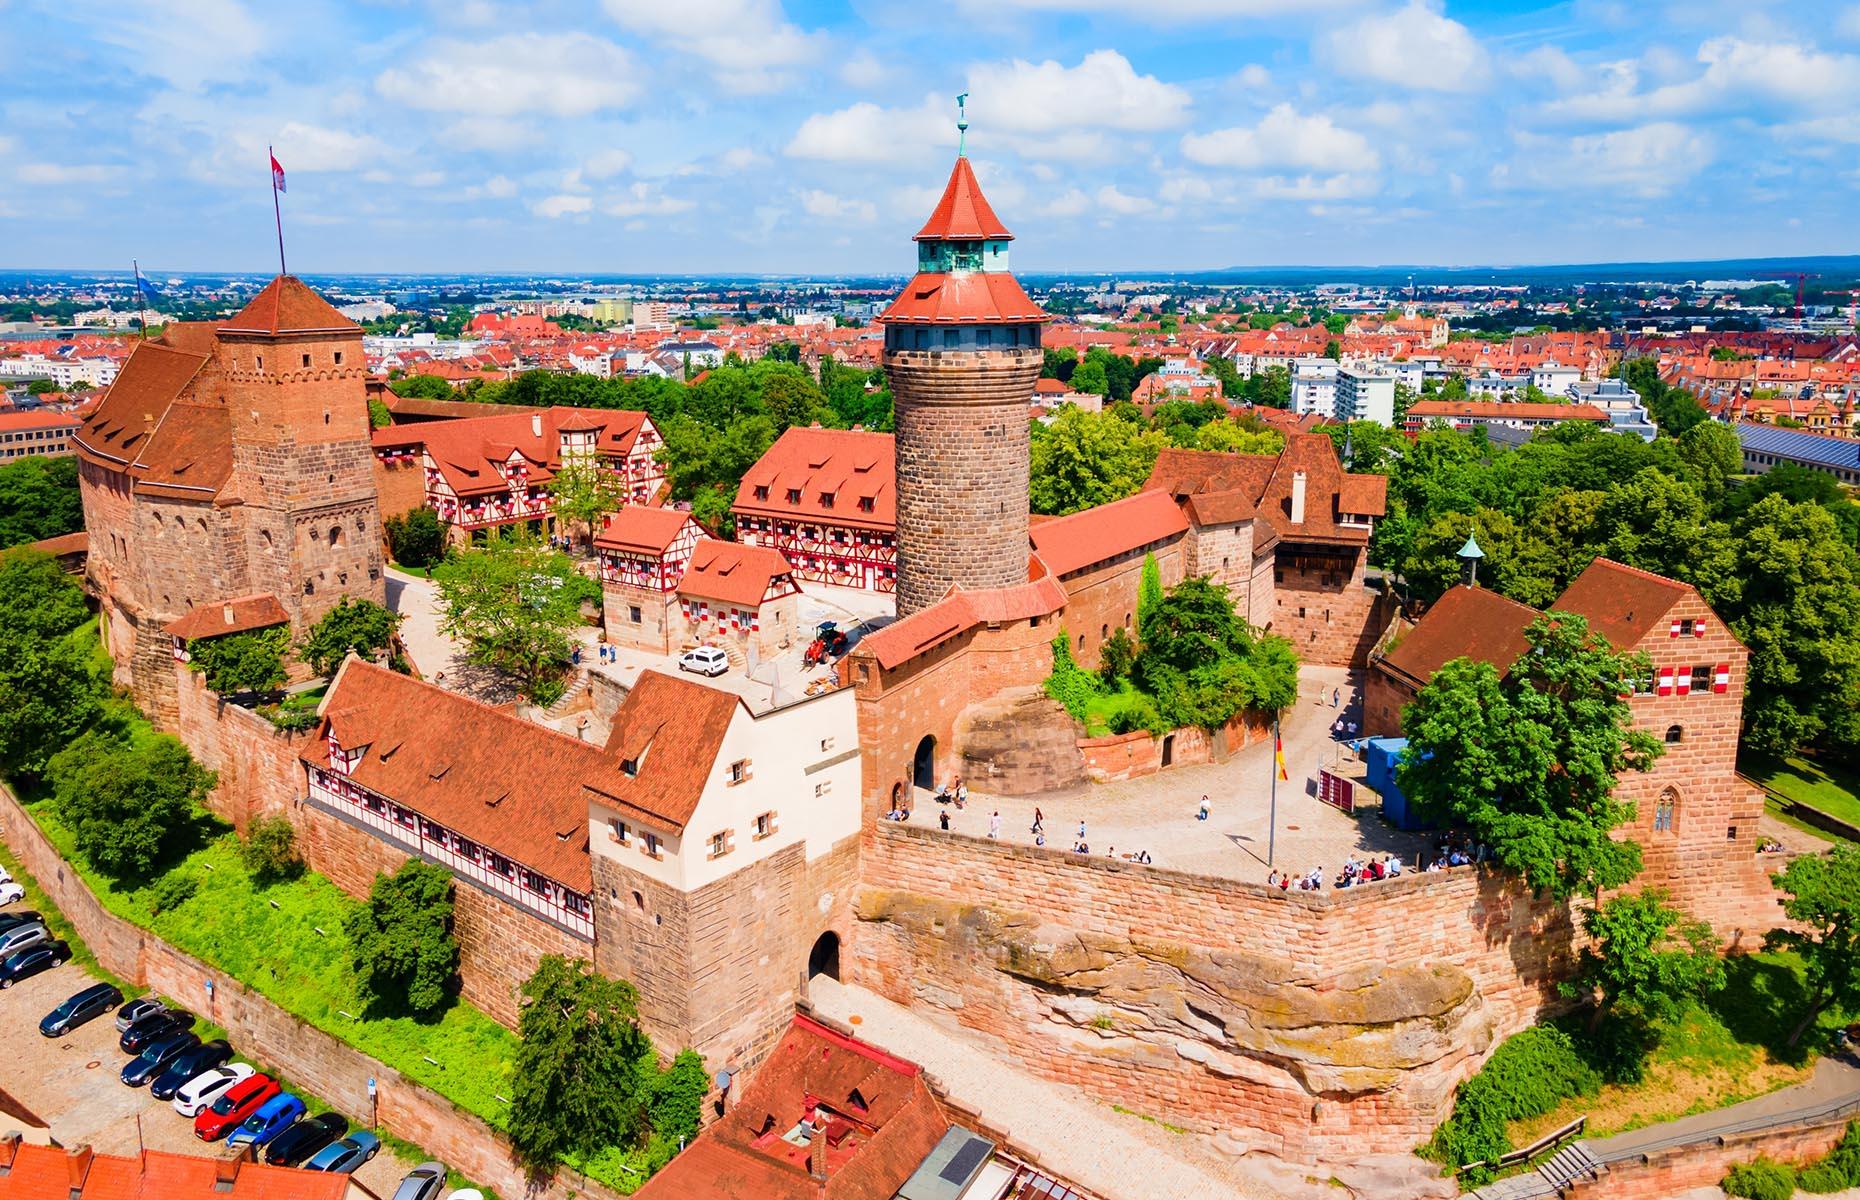 <p>Ever since Emperor Konrad III built a mighty fortress here in 1140 (pictured), the history of Nuremberg has mirrored the history of Germany. It was once the seat of the Holy Roman Empire, and several German kings have called it home. During the dark days of Nazism, huge rallies were held at a gigantic stadium out on Bayernstrasse. And after the Second World War it was here that the most evil perpetrators were put on trial. Like most of Germany, it has since recovered and boomed, and offers visitors an exciting mix of history, culture and food.</p>